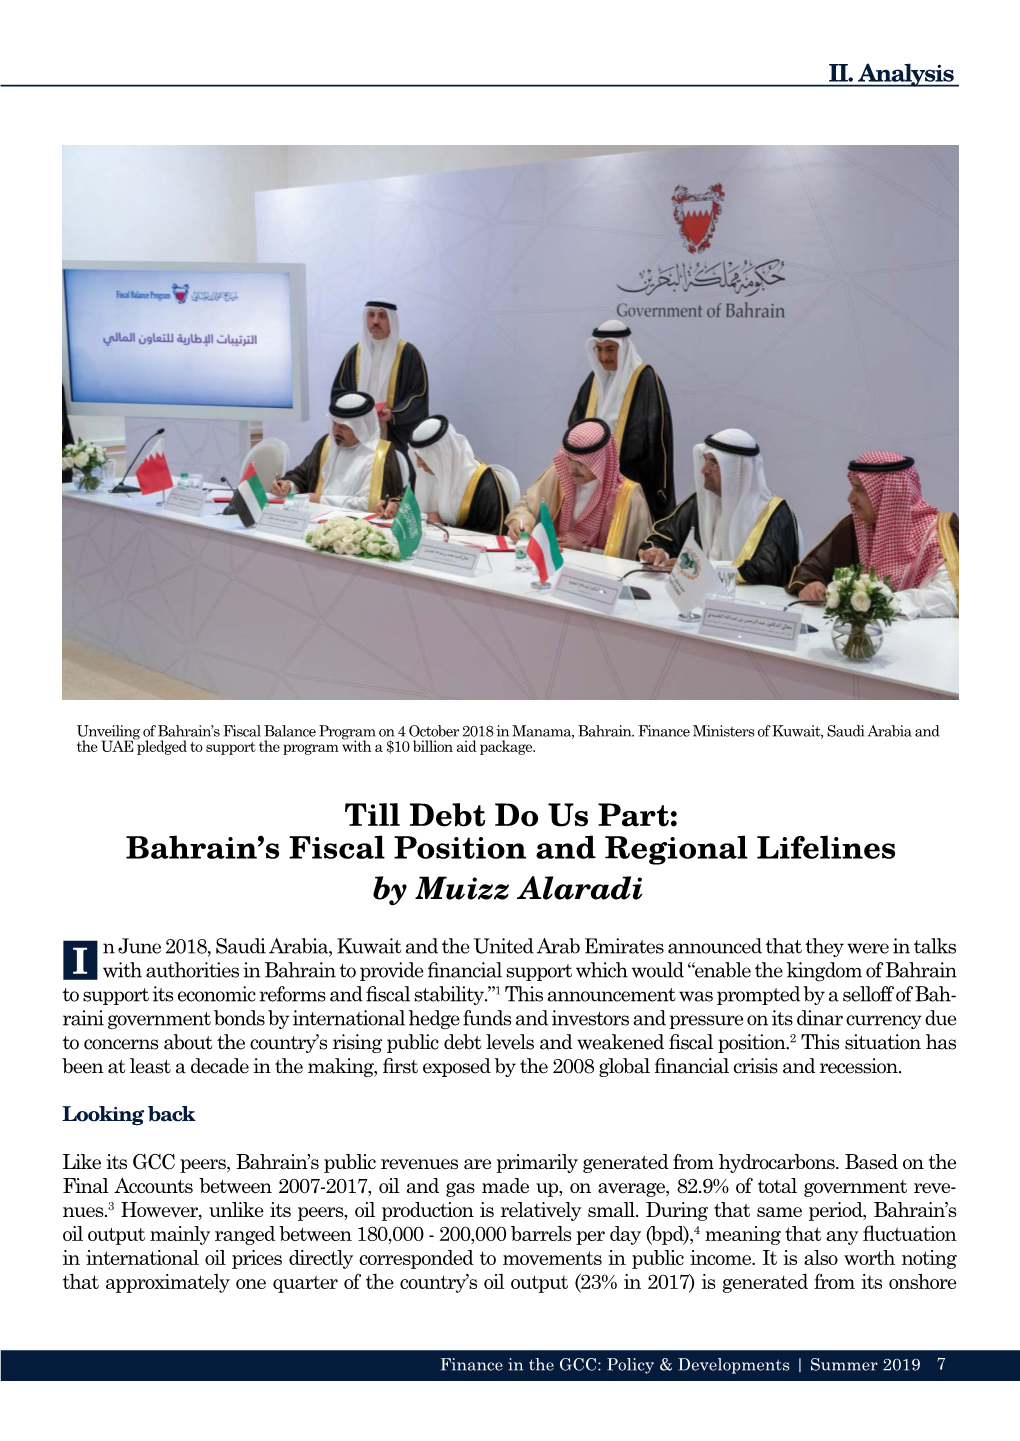 Bahrain's Fiscal Position and Regional Lifelines by Muizz Alaradi